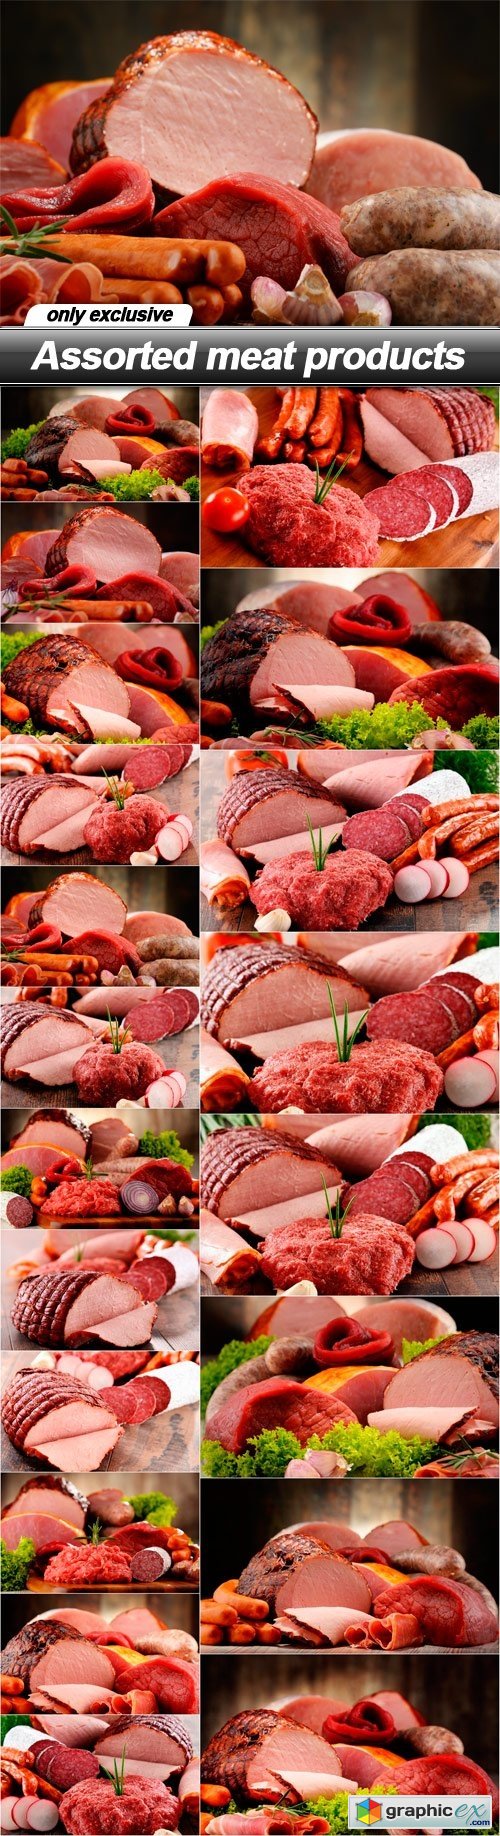 Assorted meat products - 20 UHQ JPEG